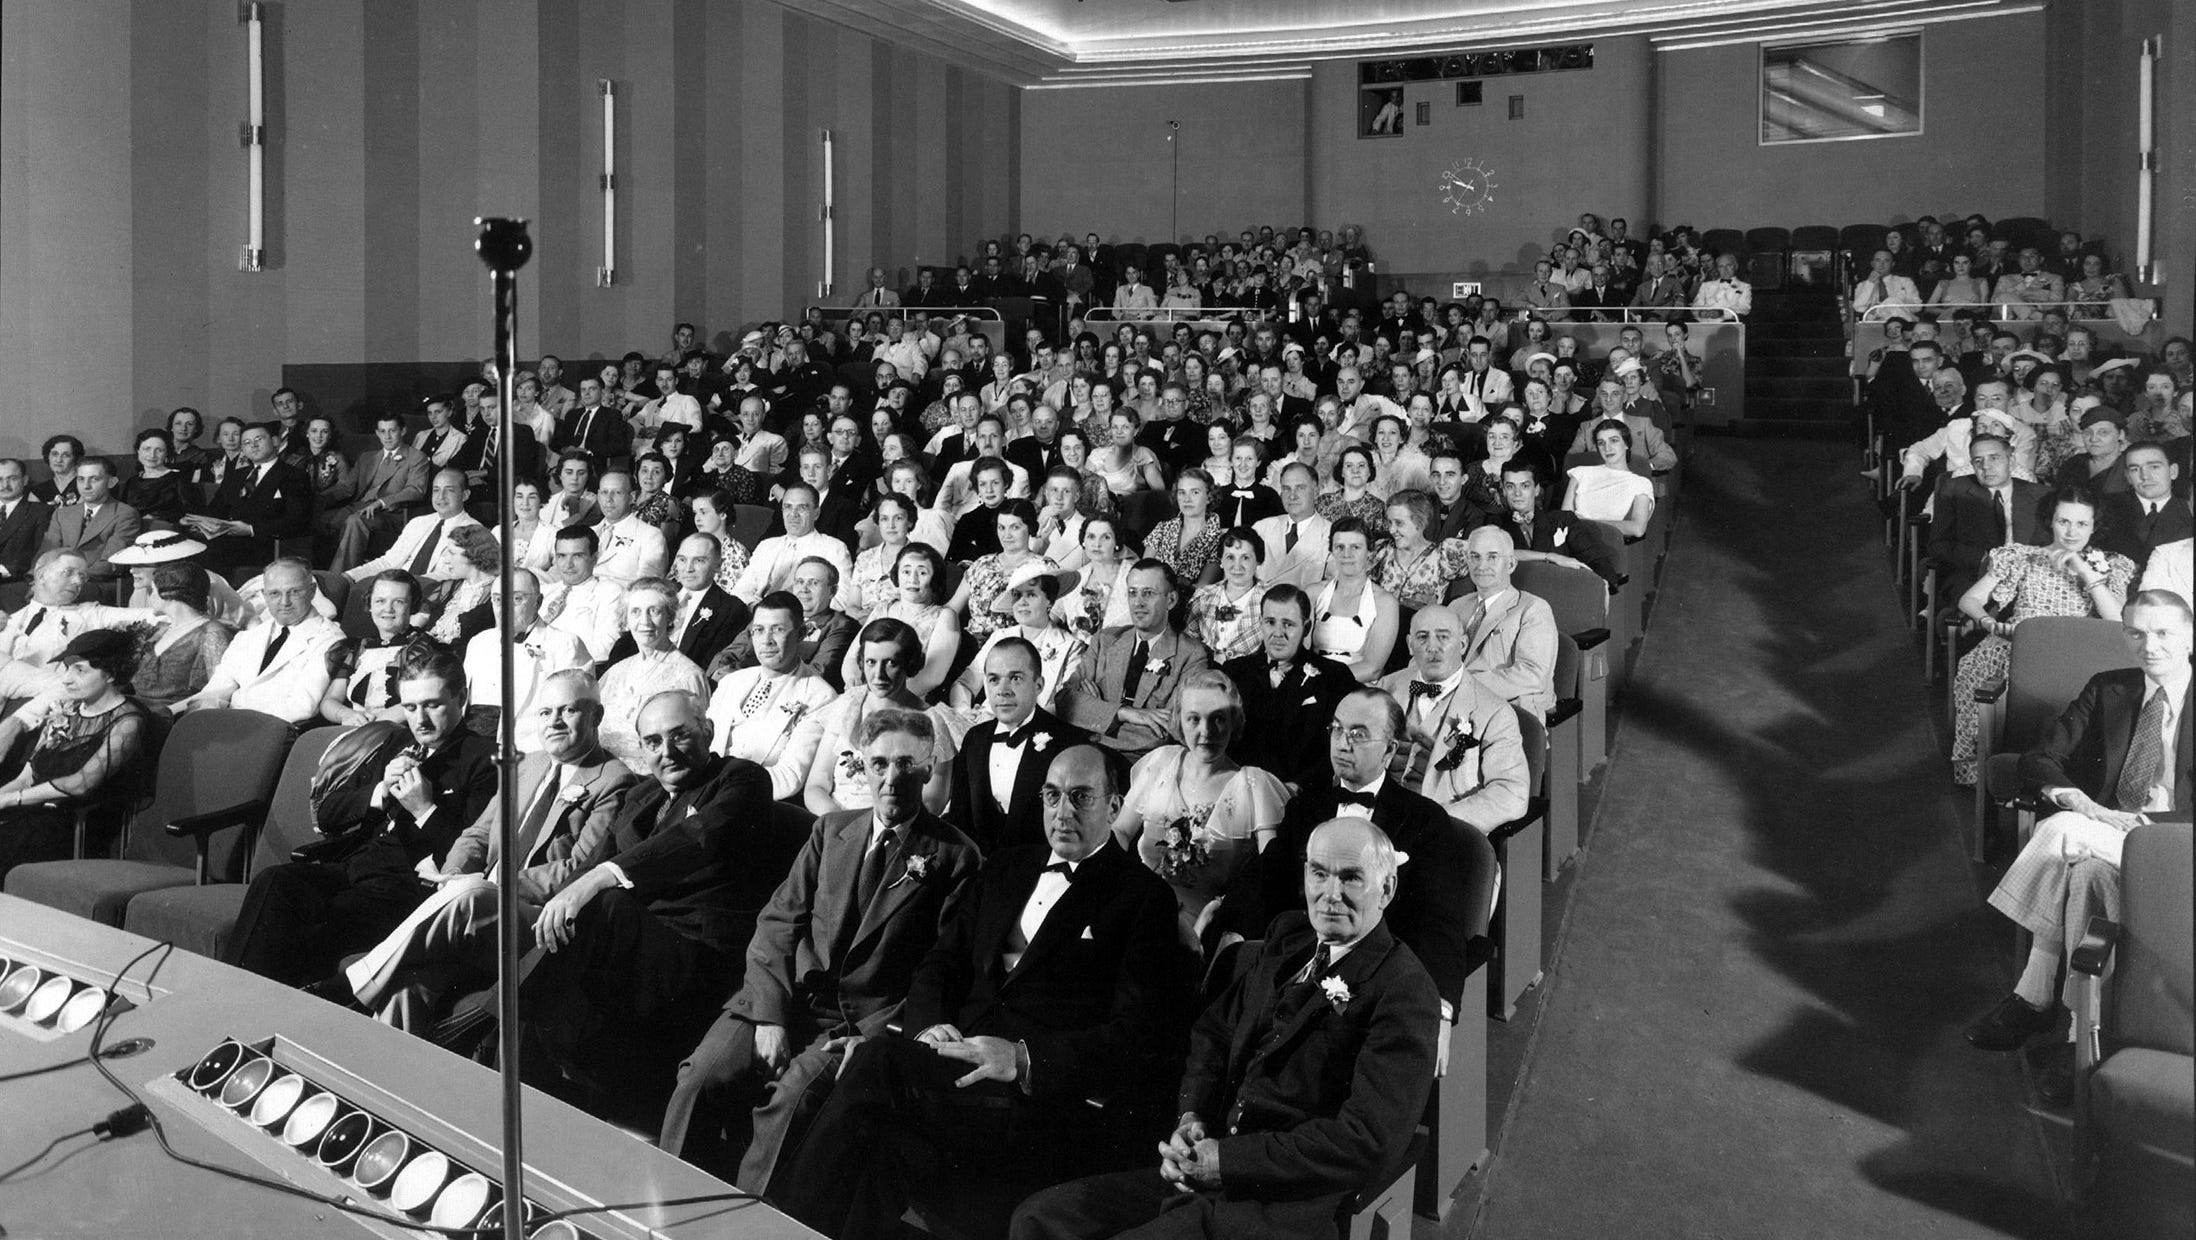 An opening-night crowd fills the 320-seat auditorium at WWJ.  Public curiosity about the new studio building was high.  Approximately 140,000 people visited in its first year.